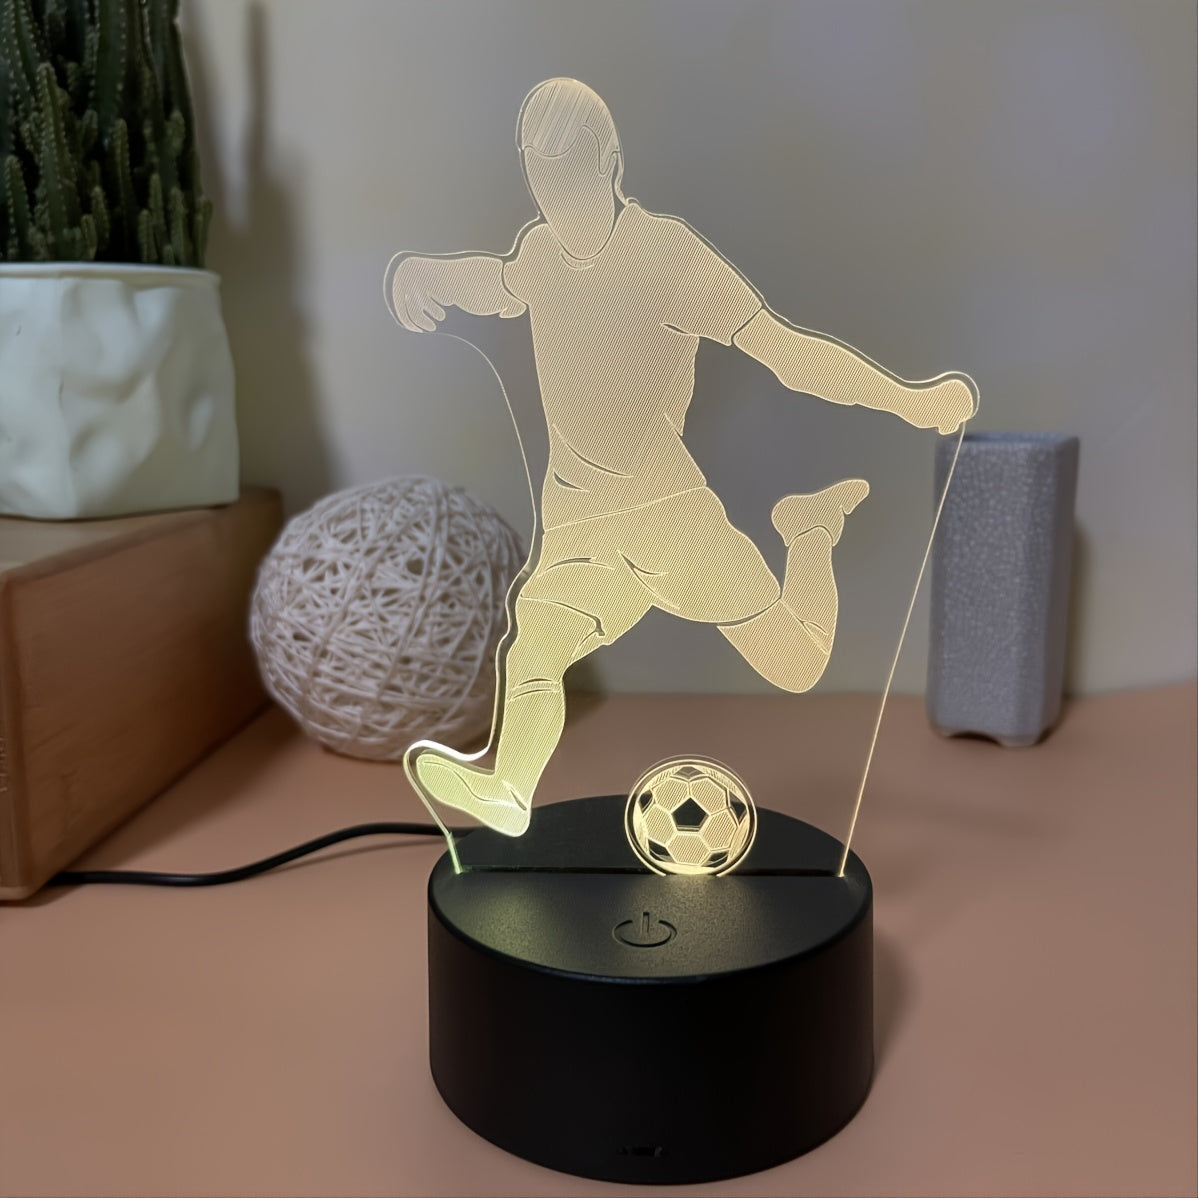 1 x 3D game football night light table optical illusion light, colour changing light LED table lamp